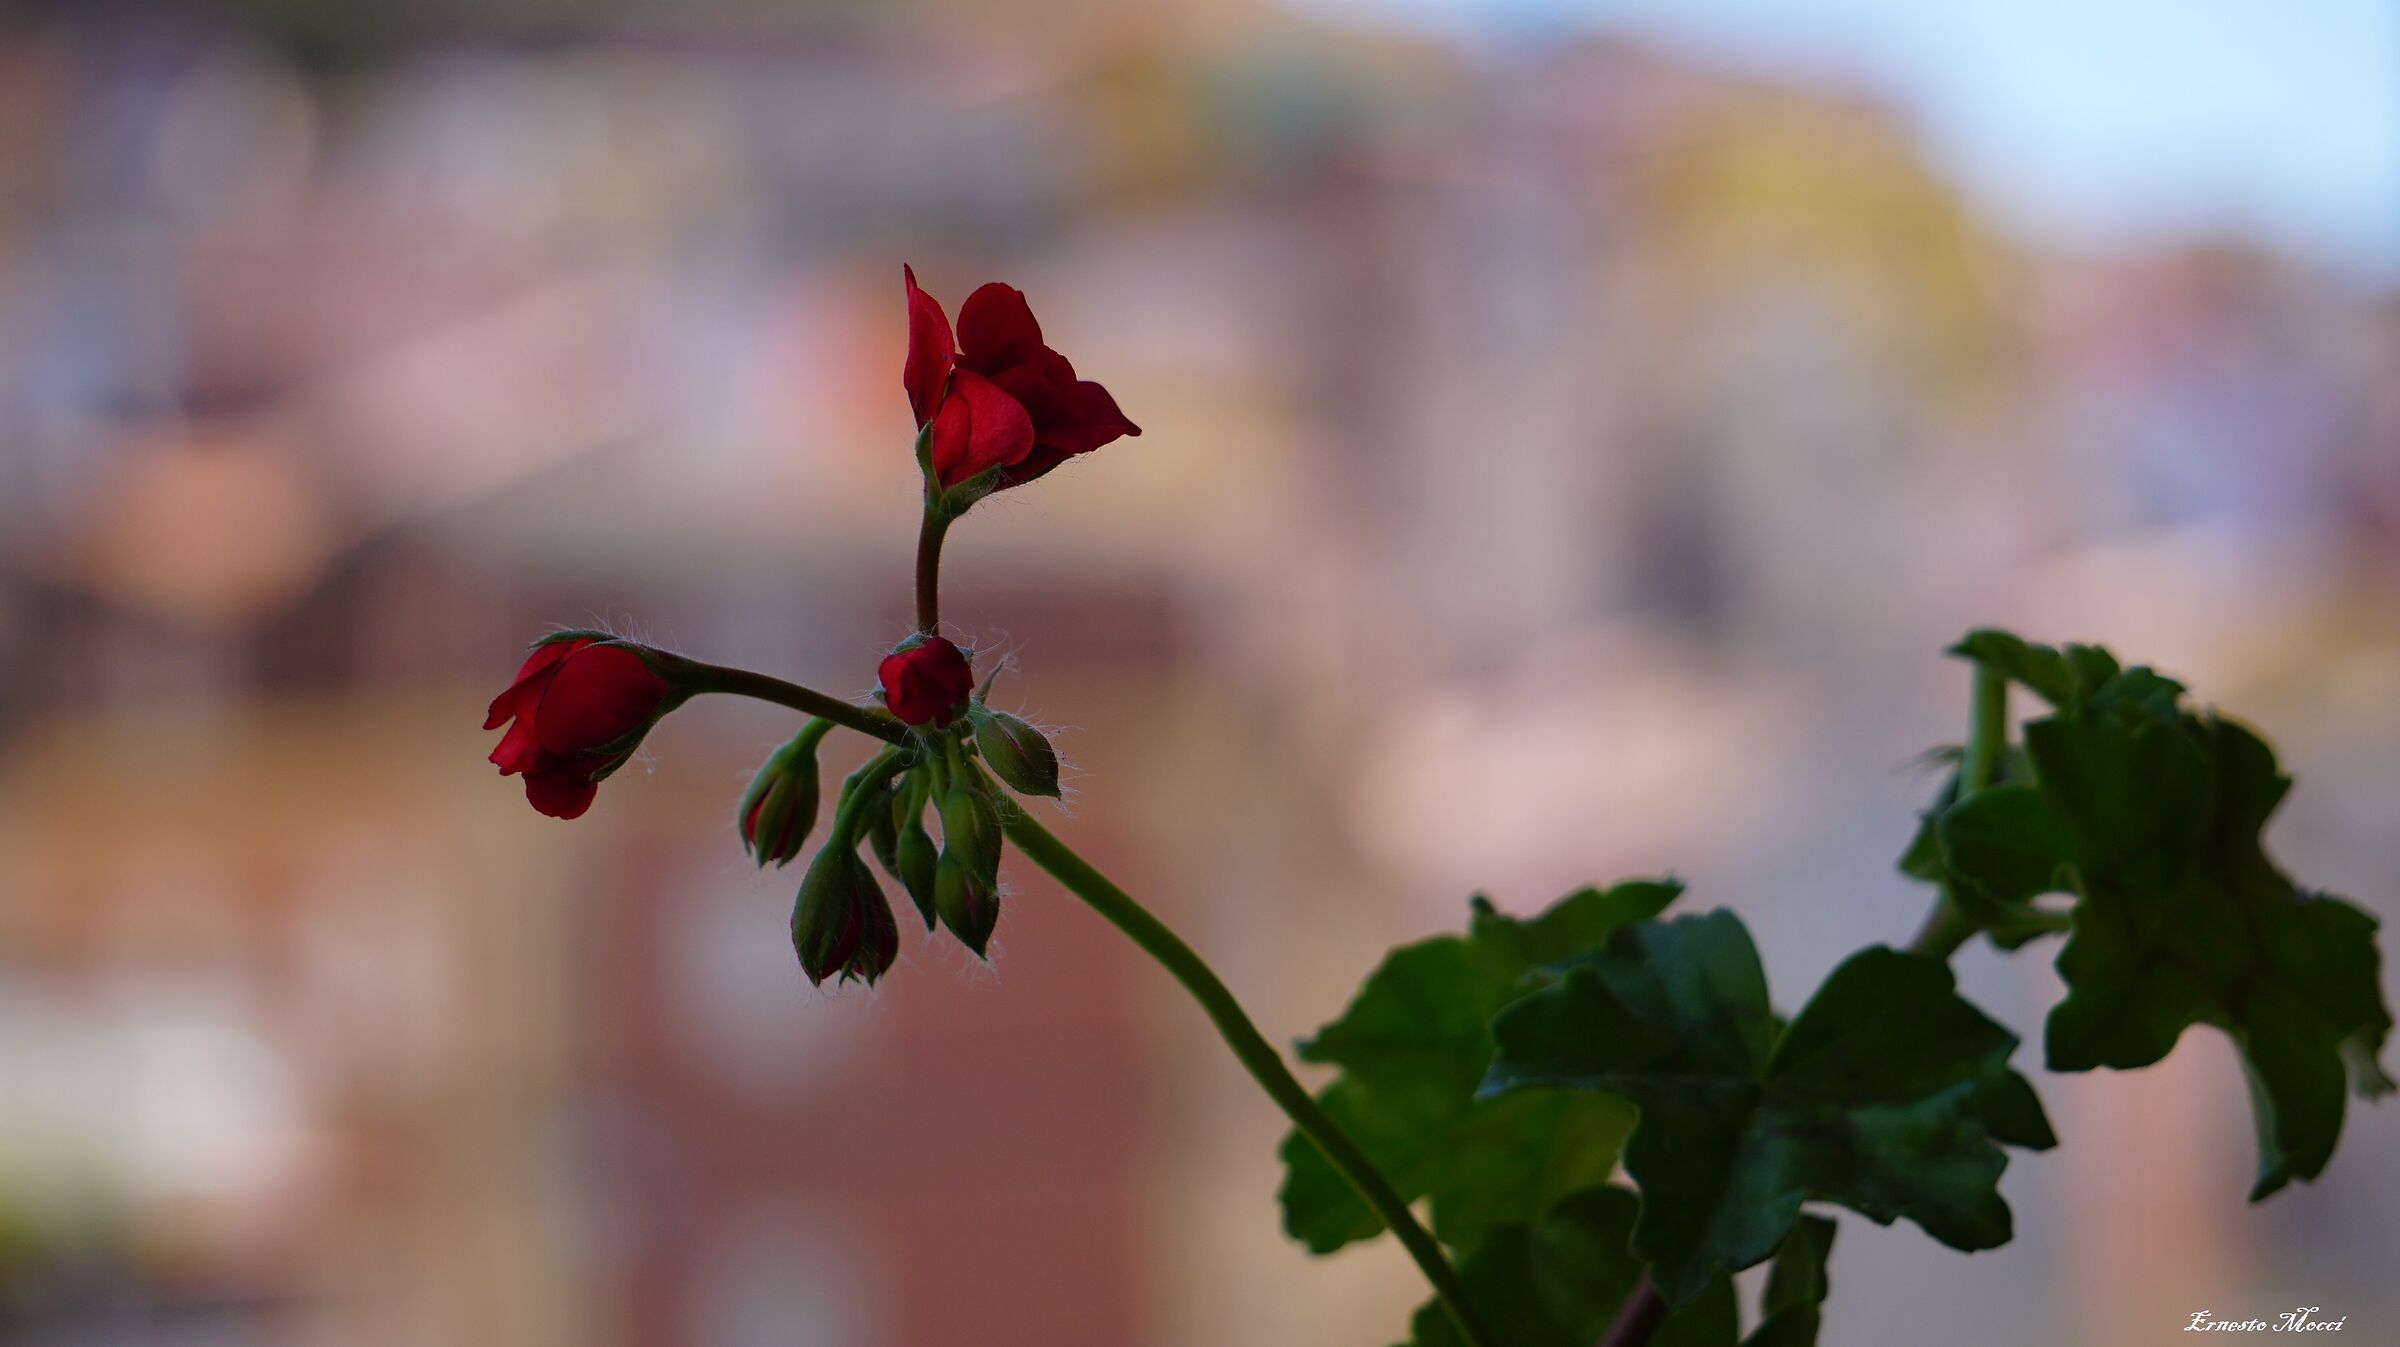 My geranium starts to bloom and that's good ...